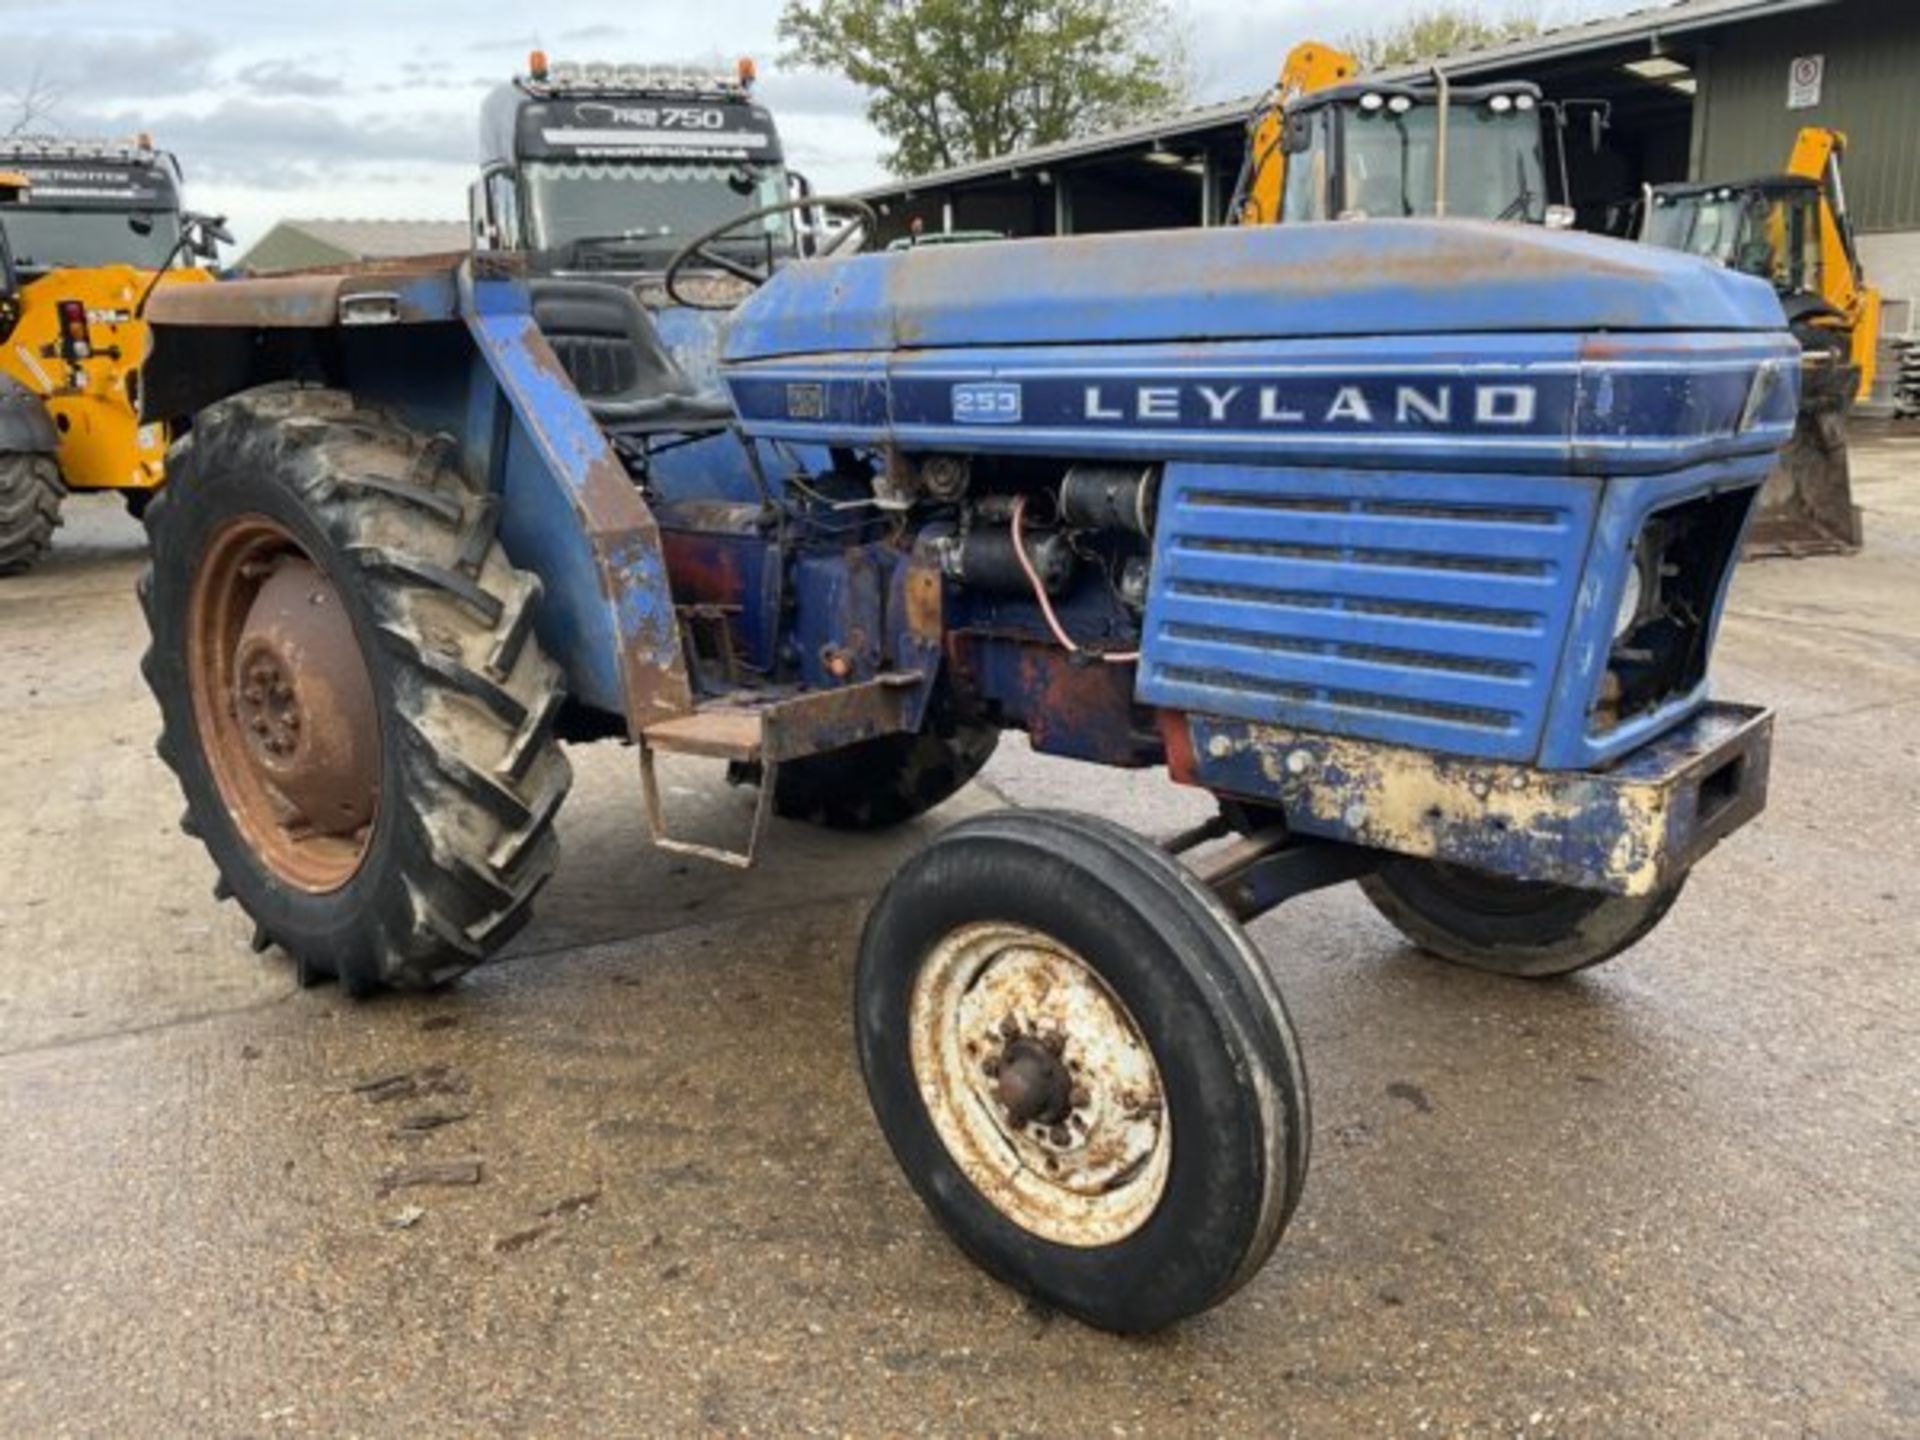 YEAR 1992 – K REG LEYLAND 253 TRACTOR. COMES WITH PART CAB. 3 CYLINDER PERKINS ENGINE